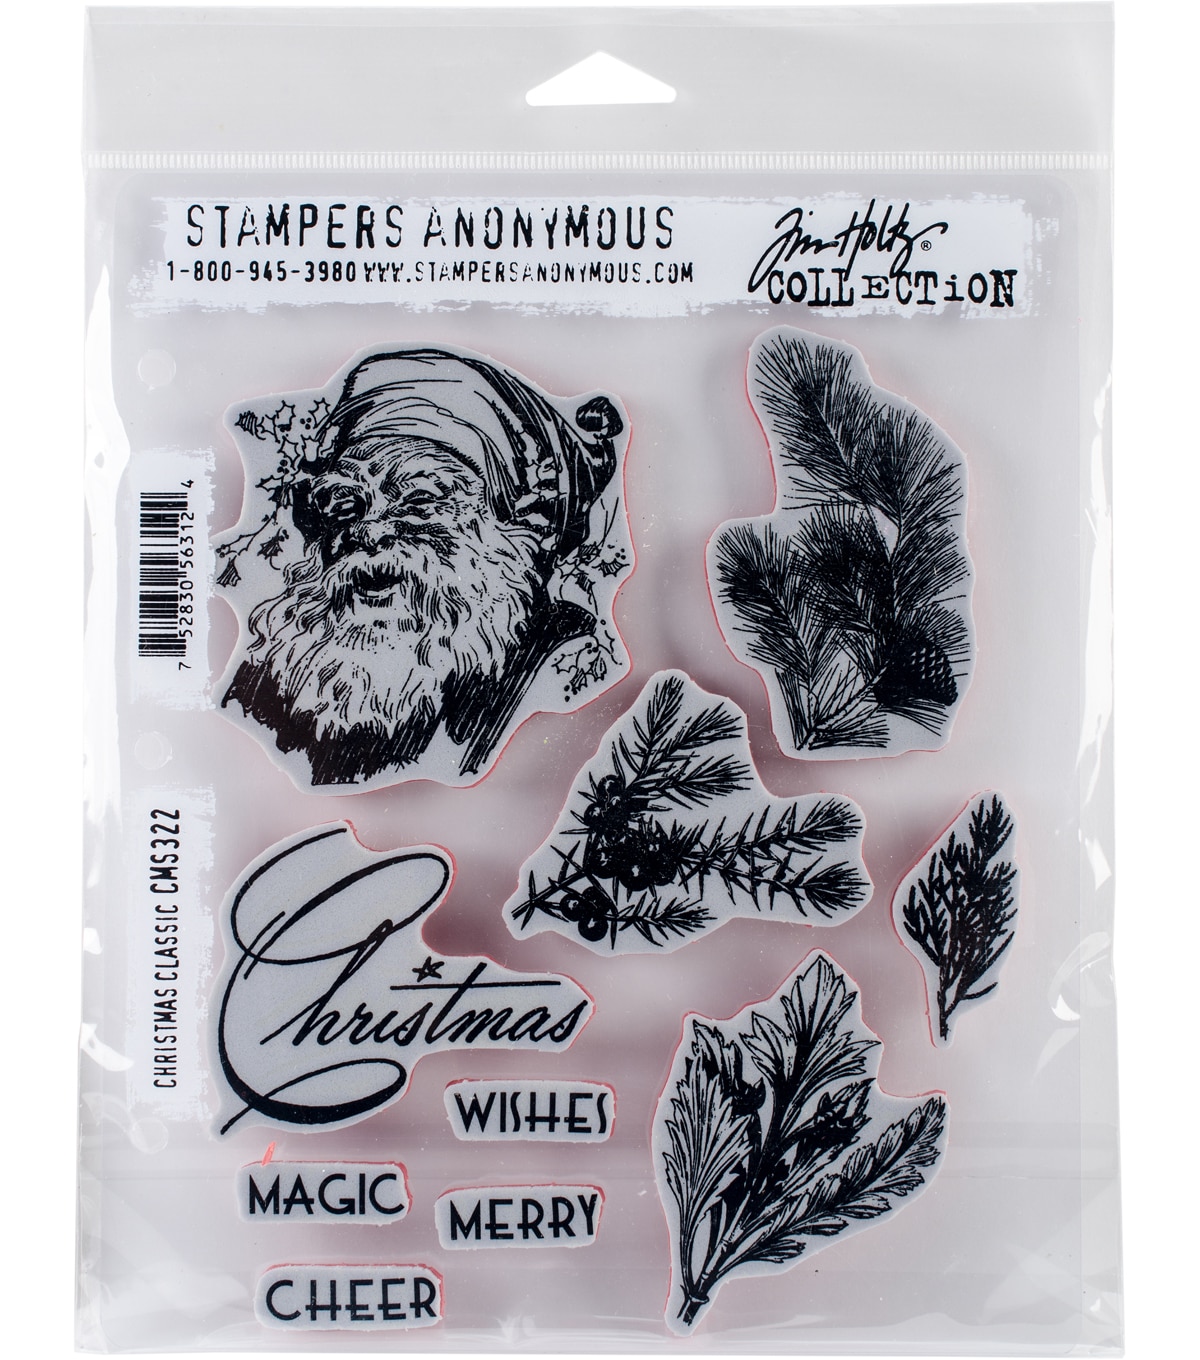 Stampers Anonymous Tim Holtz Cling StampsChristmas Classic JOANN